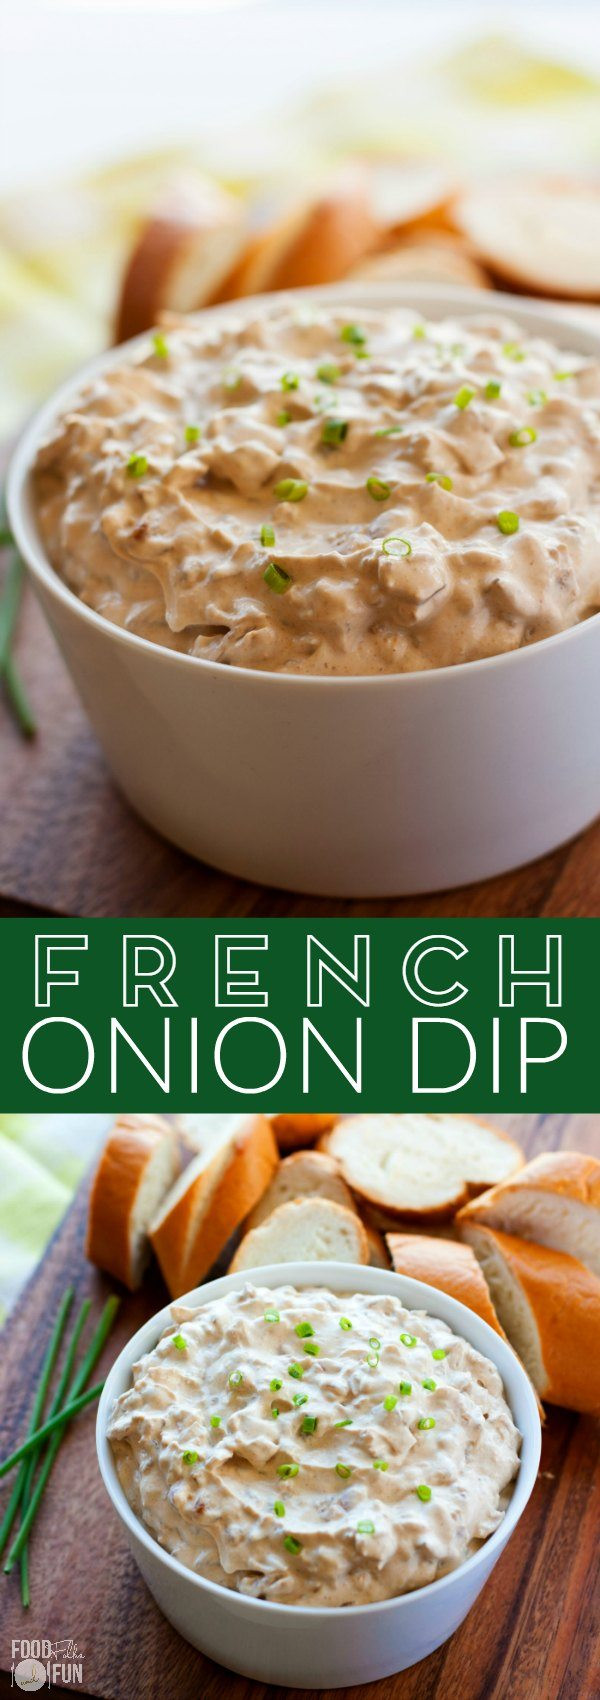 Onion Dip Recipe
 Homemade French ion Dip • Food Folks and Fun